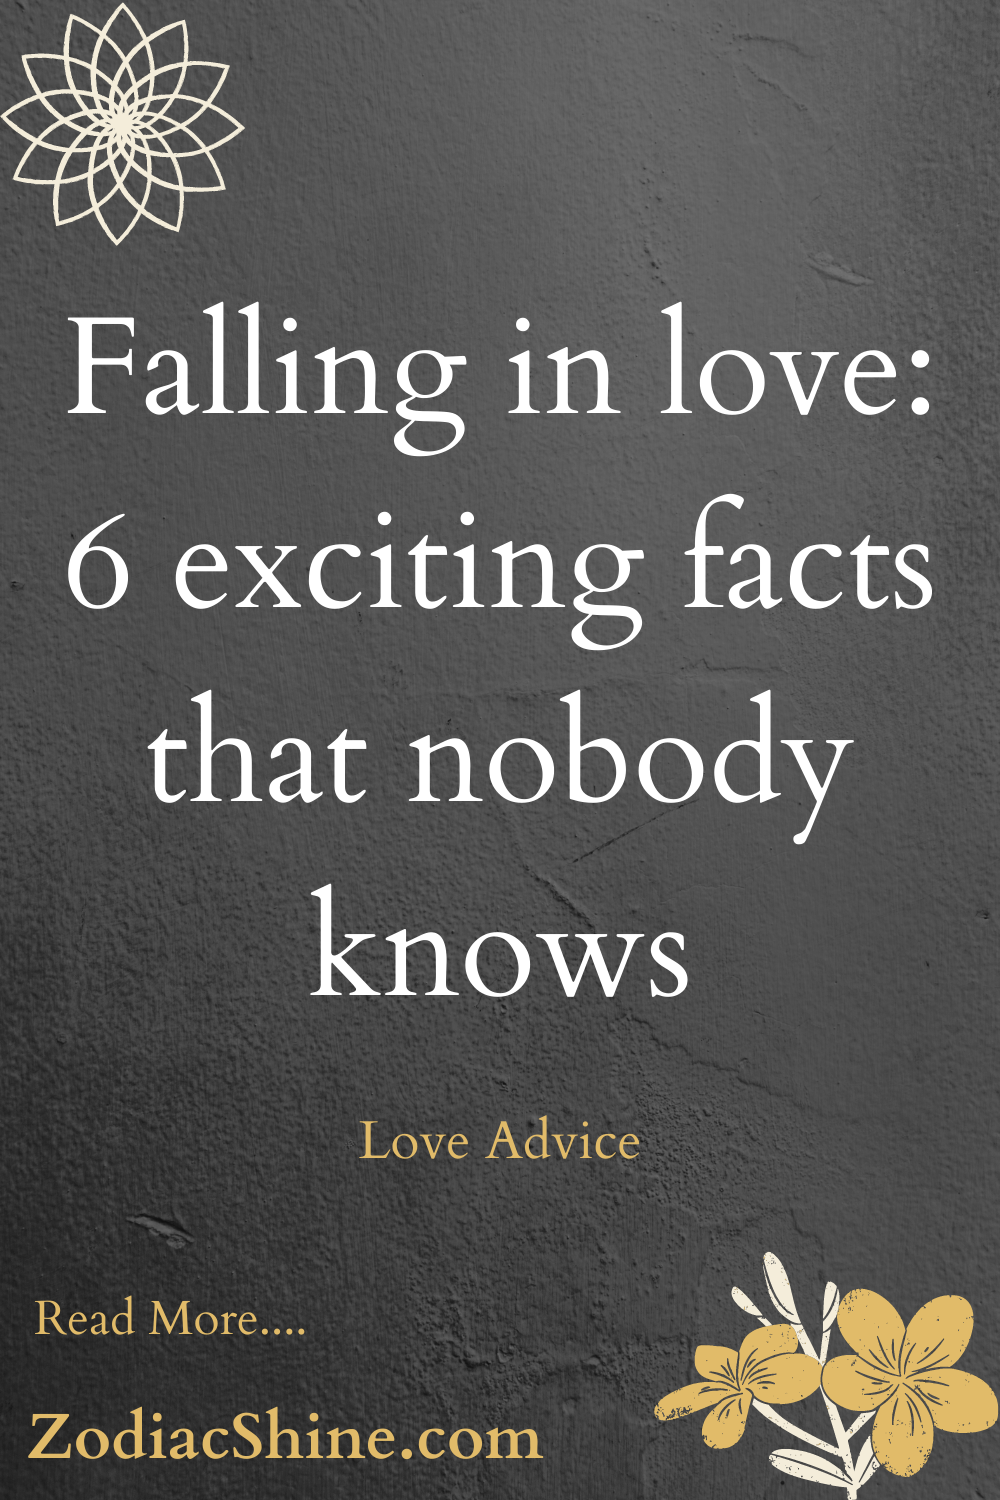 Falling in love: 6 exciting facts that nobody knows